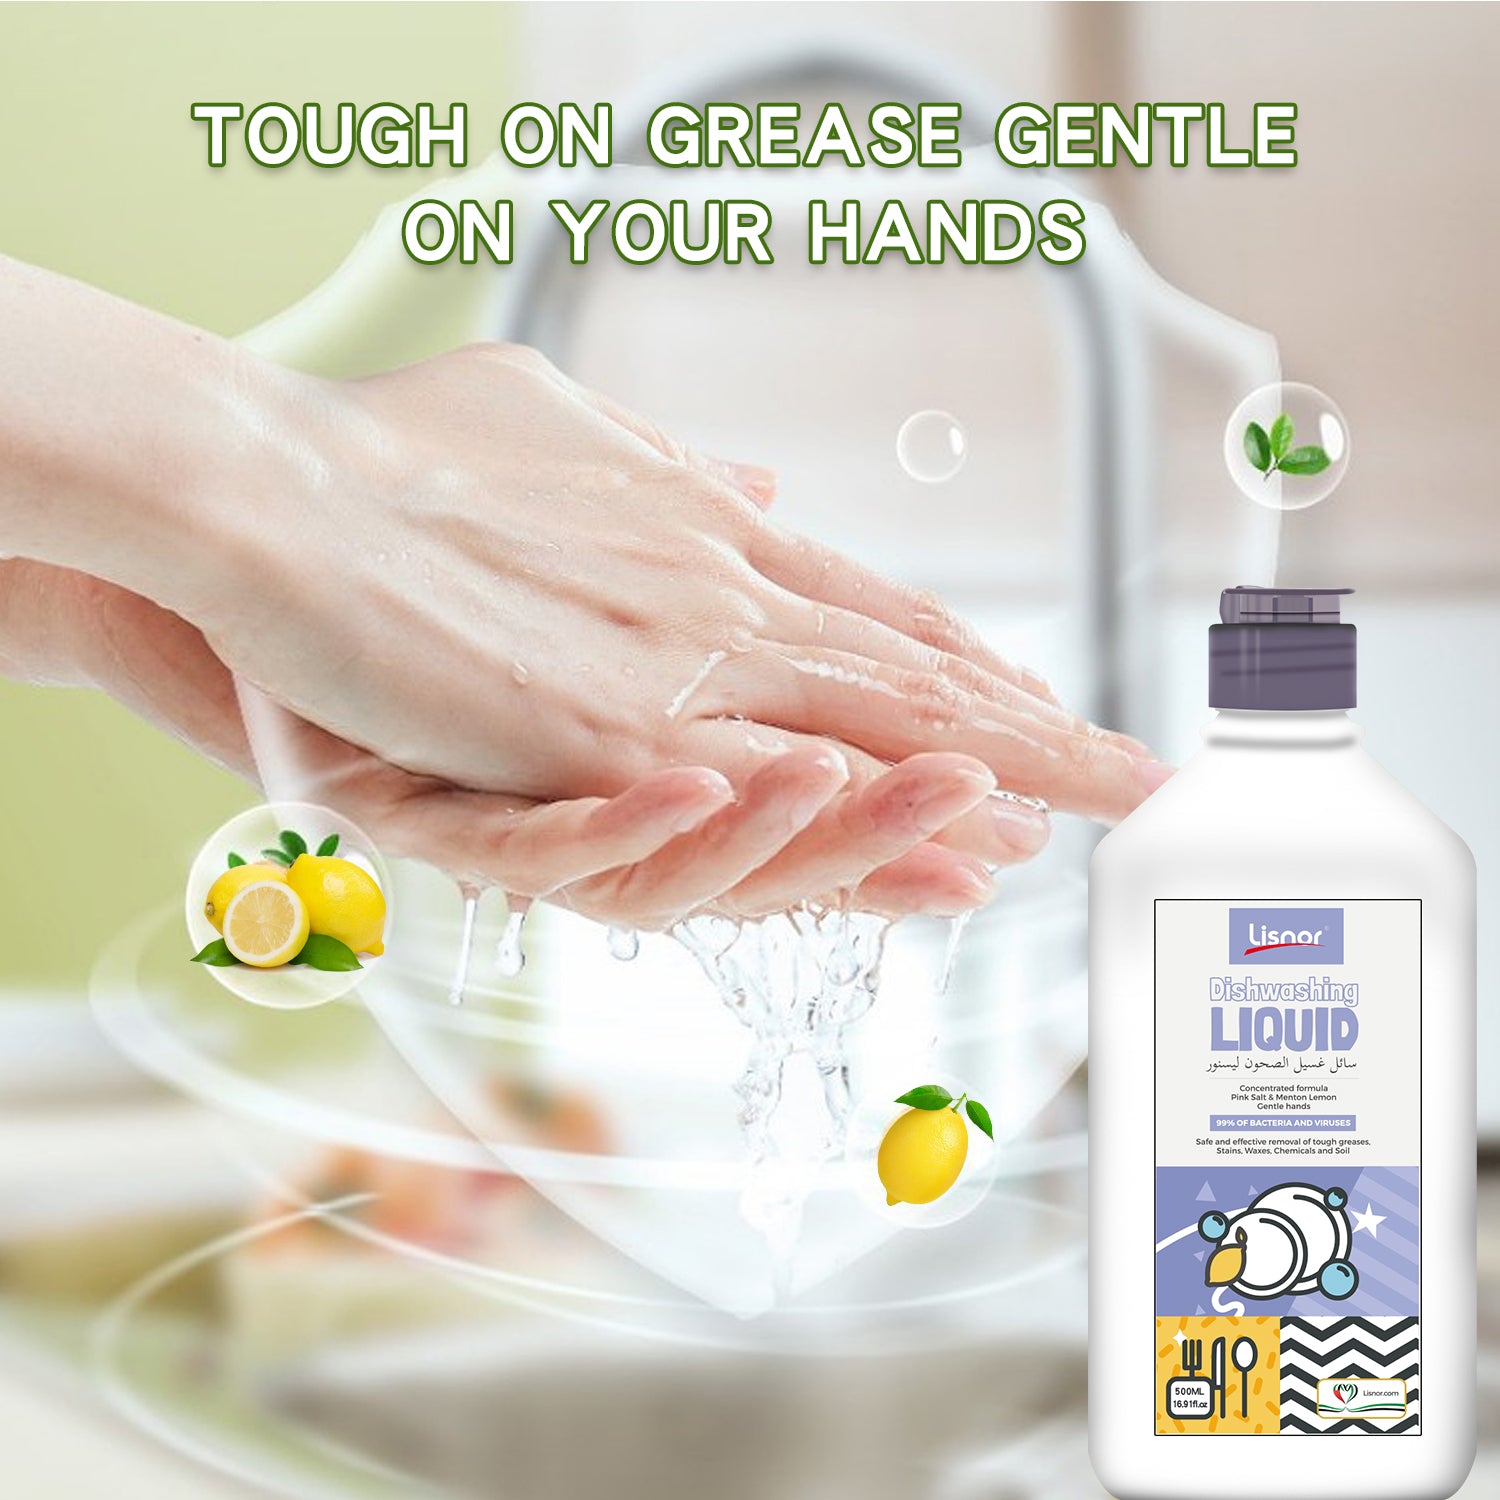 Dishwashing Liquid 500ml. Concentrated Formula Pink Salt & Menton Lemon. Gentle Hands. Safe and Effective removal of tough greases, Stains, Waxes, Chemicals and Soils.